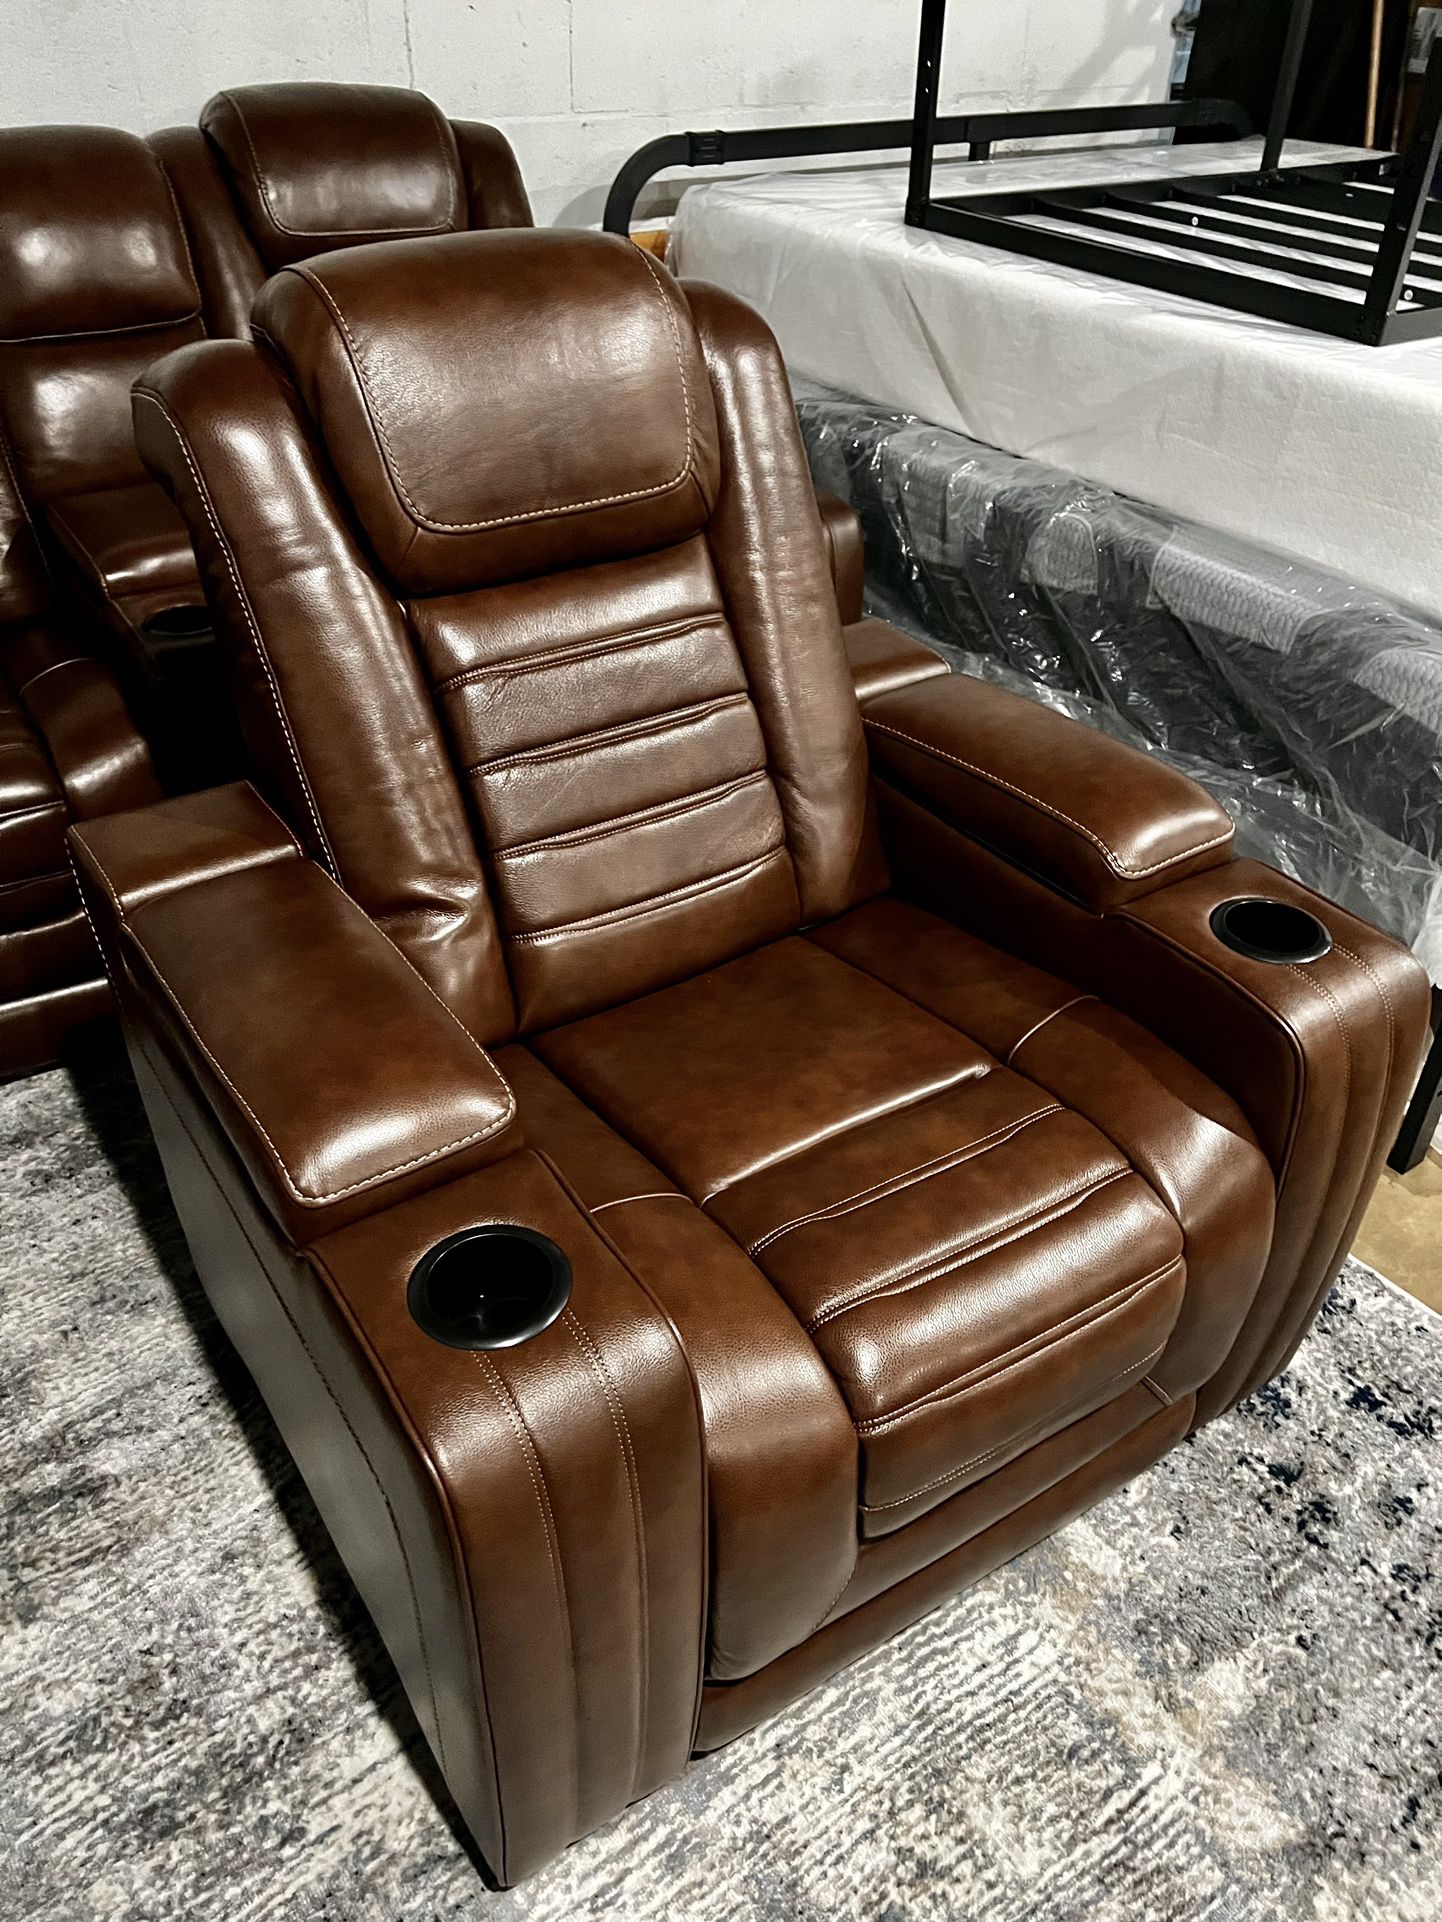 New Leather Power Recliner, Heater, Massage Chair, Easy Financing Easy Payments